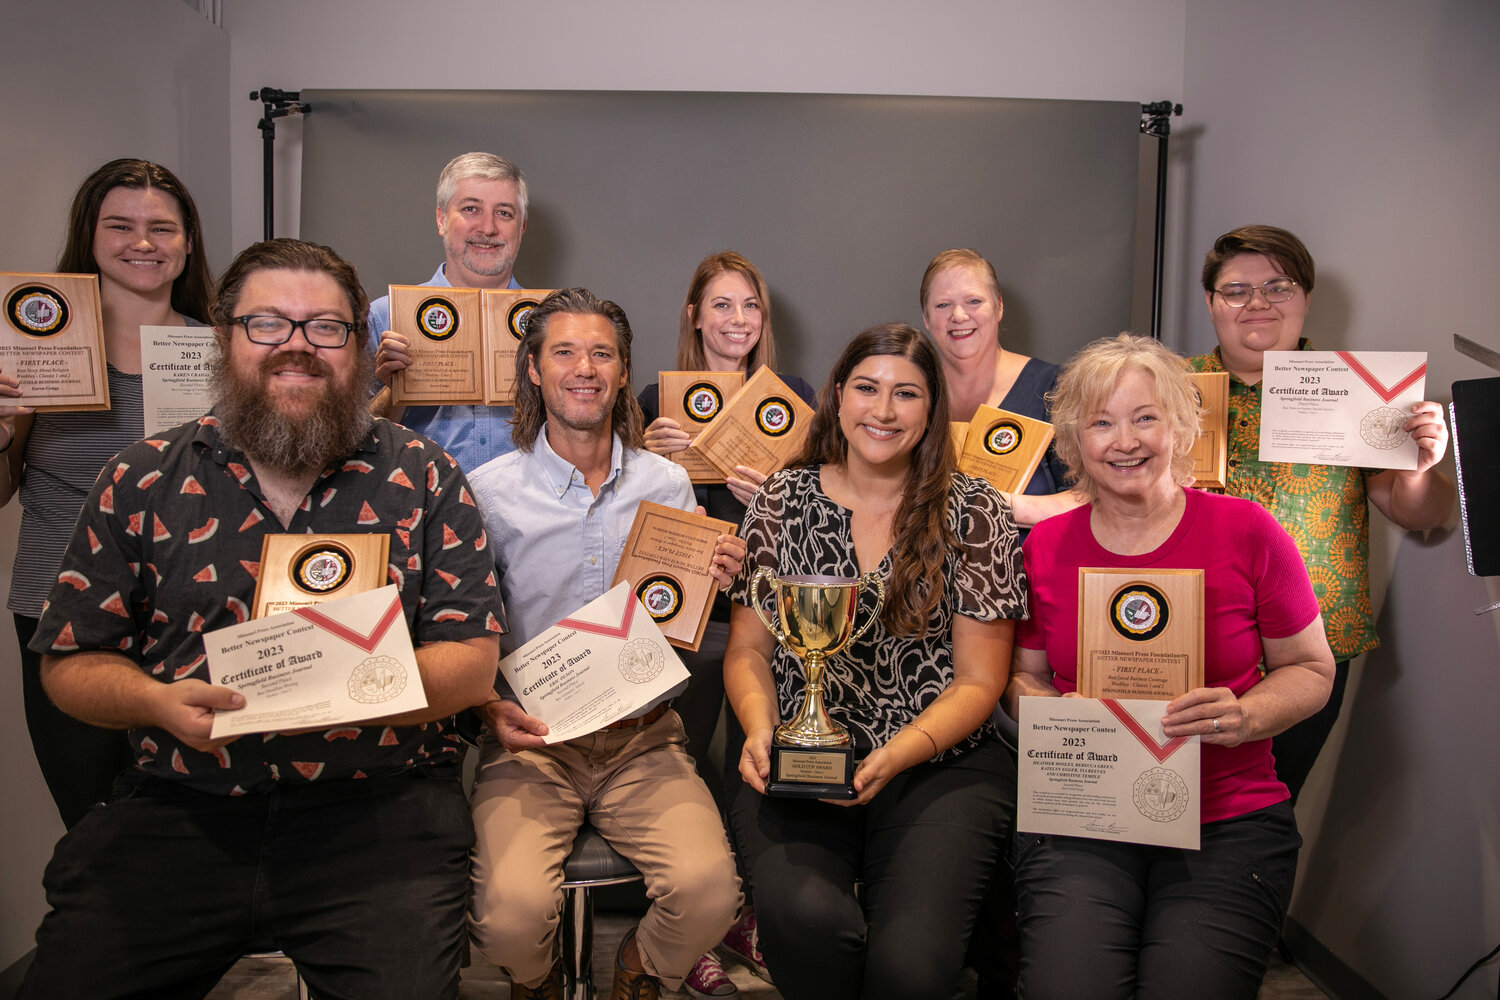 SBJ staff have been presented with 26 awards. Back row: Tawnie Wilson, Mike Cullinan, Rebecca Green, Karen Craigo and Katelyn Egger. Front row: Geoff Pickle, Eric Olson, Christine Temple and Heather Mosley.